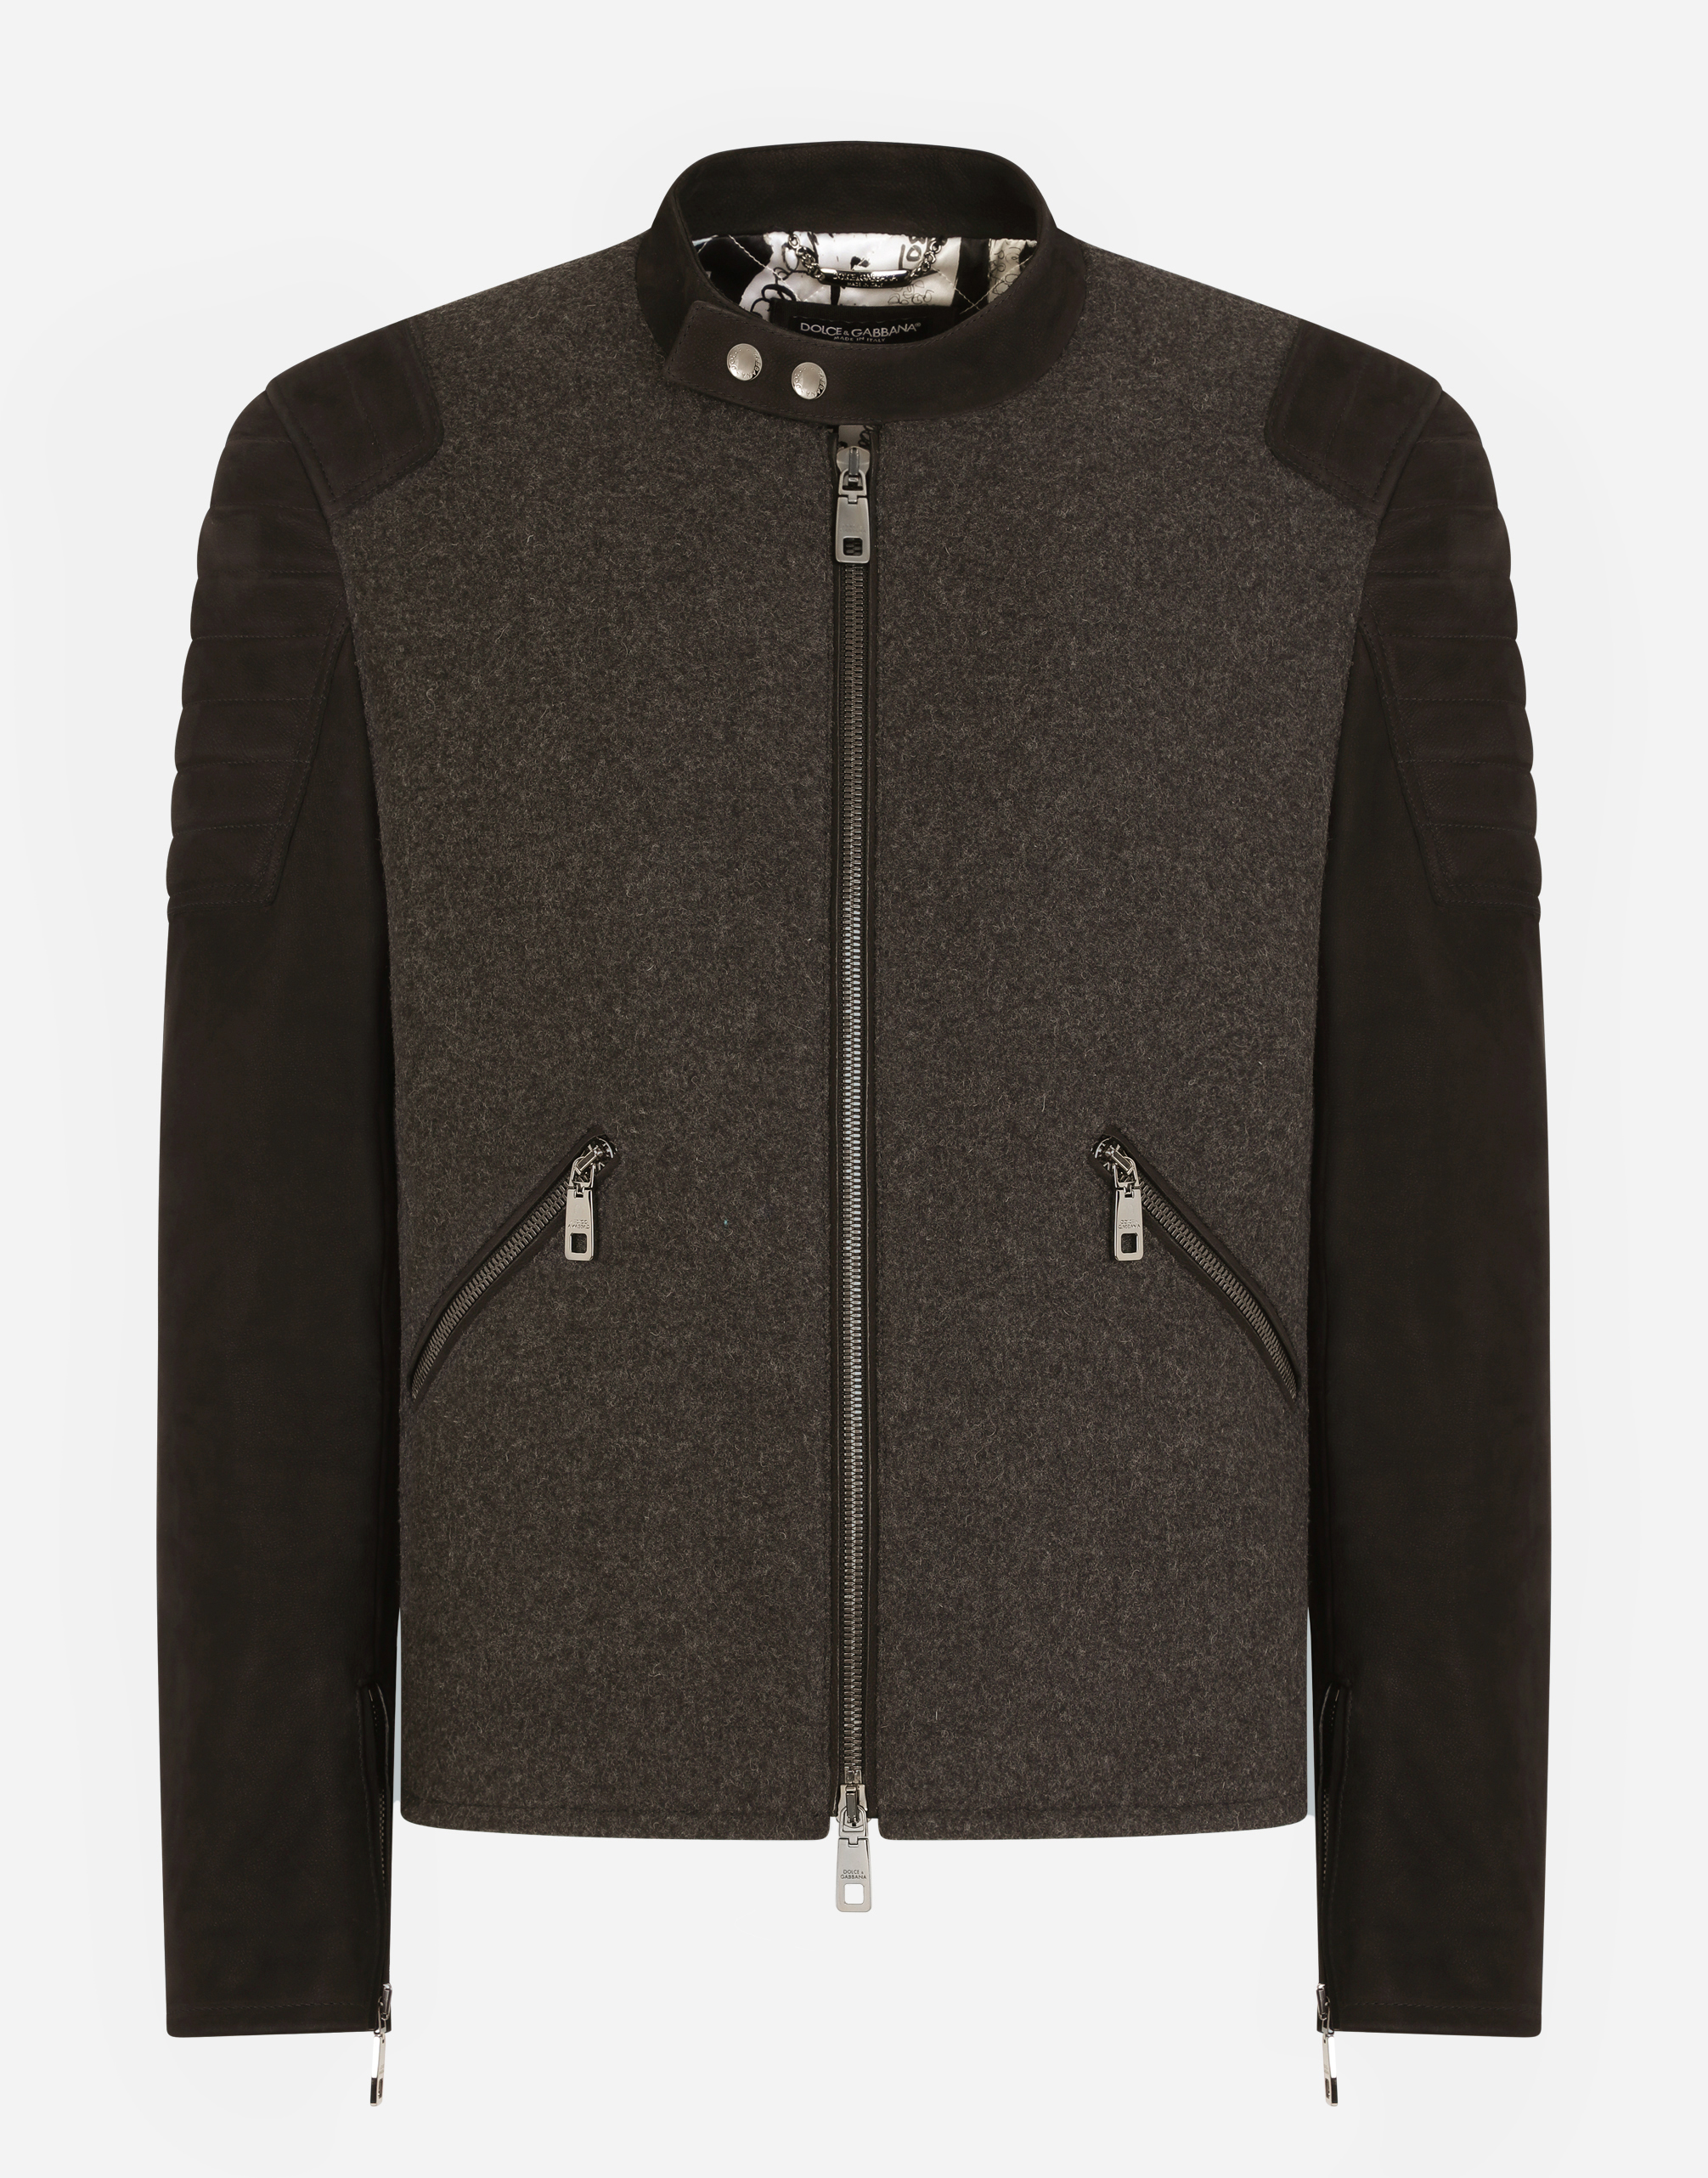 Wool jacket with leather sleeves and details in Multicolor